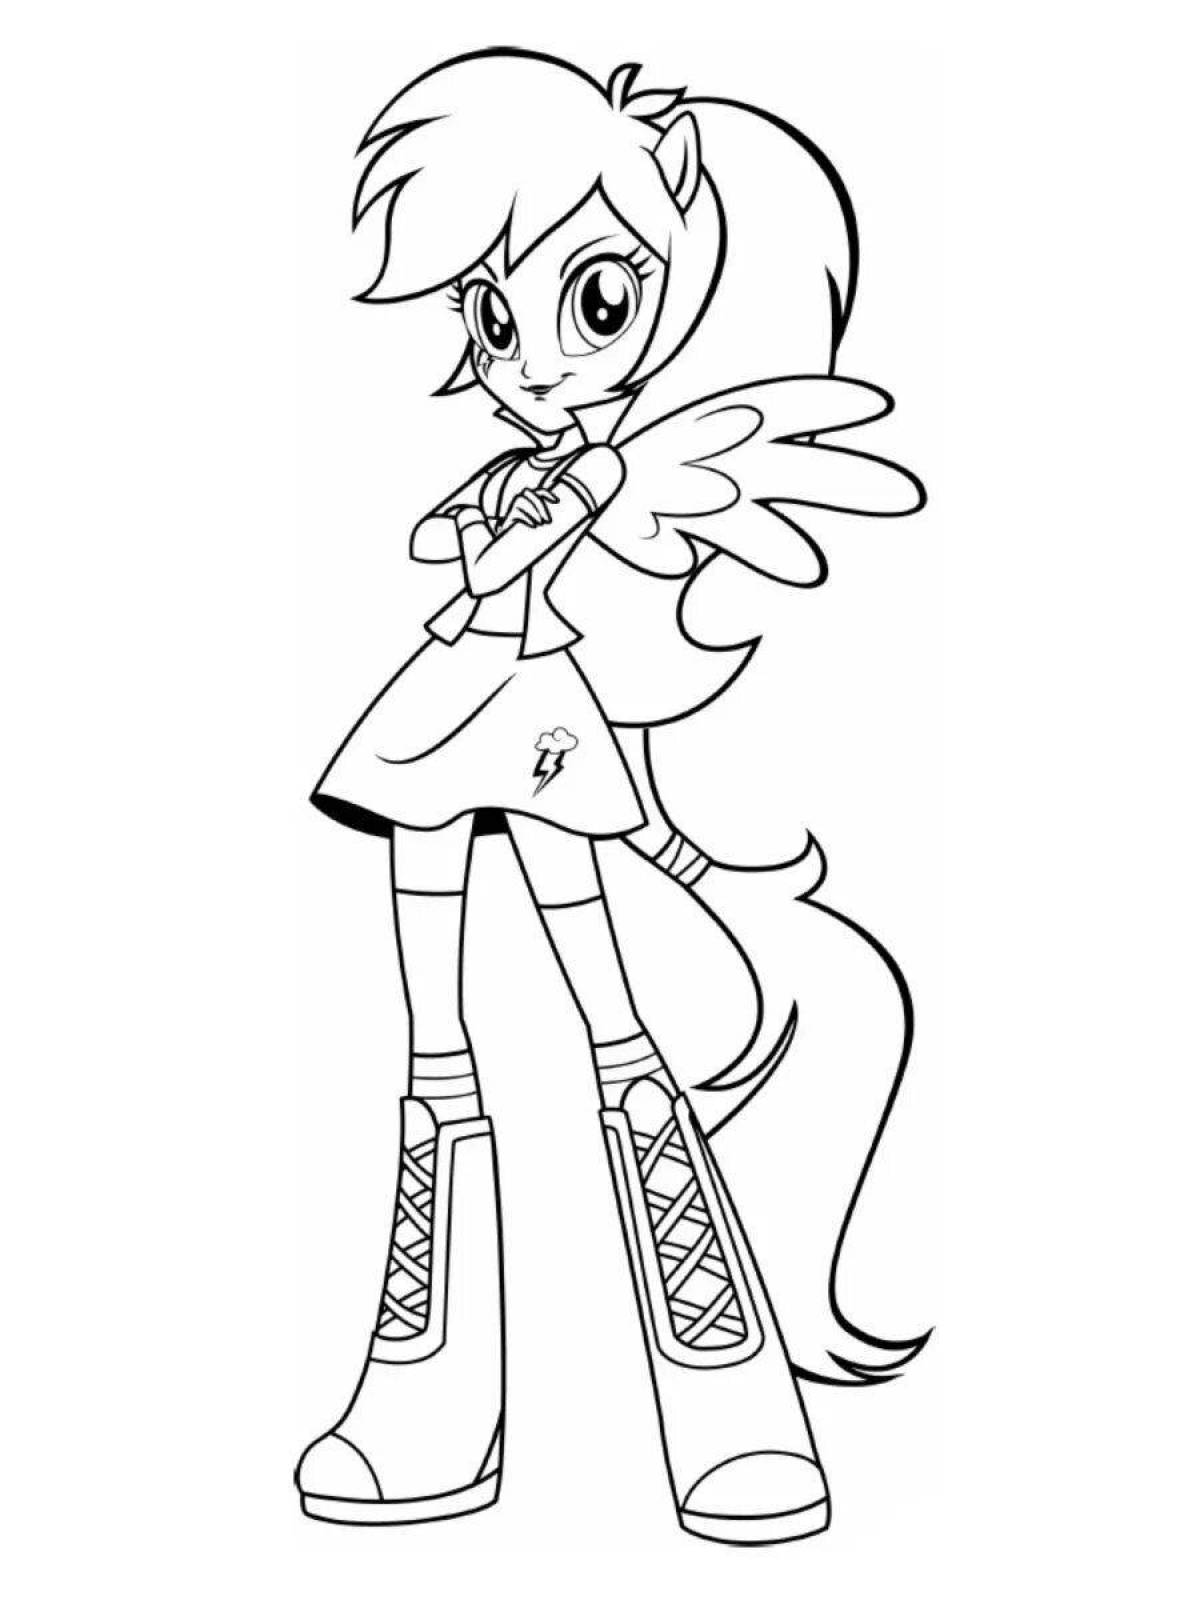 Radiant coloring page rainbow dash girl